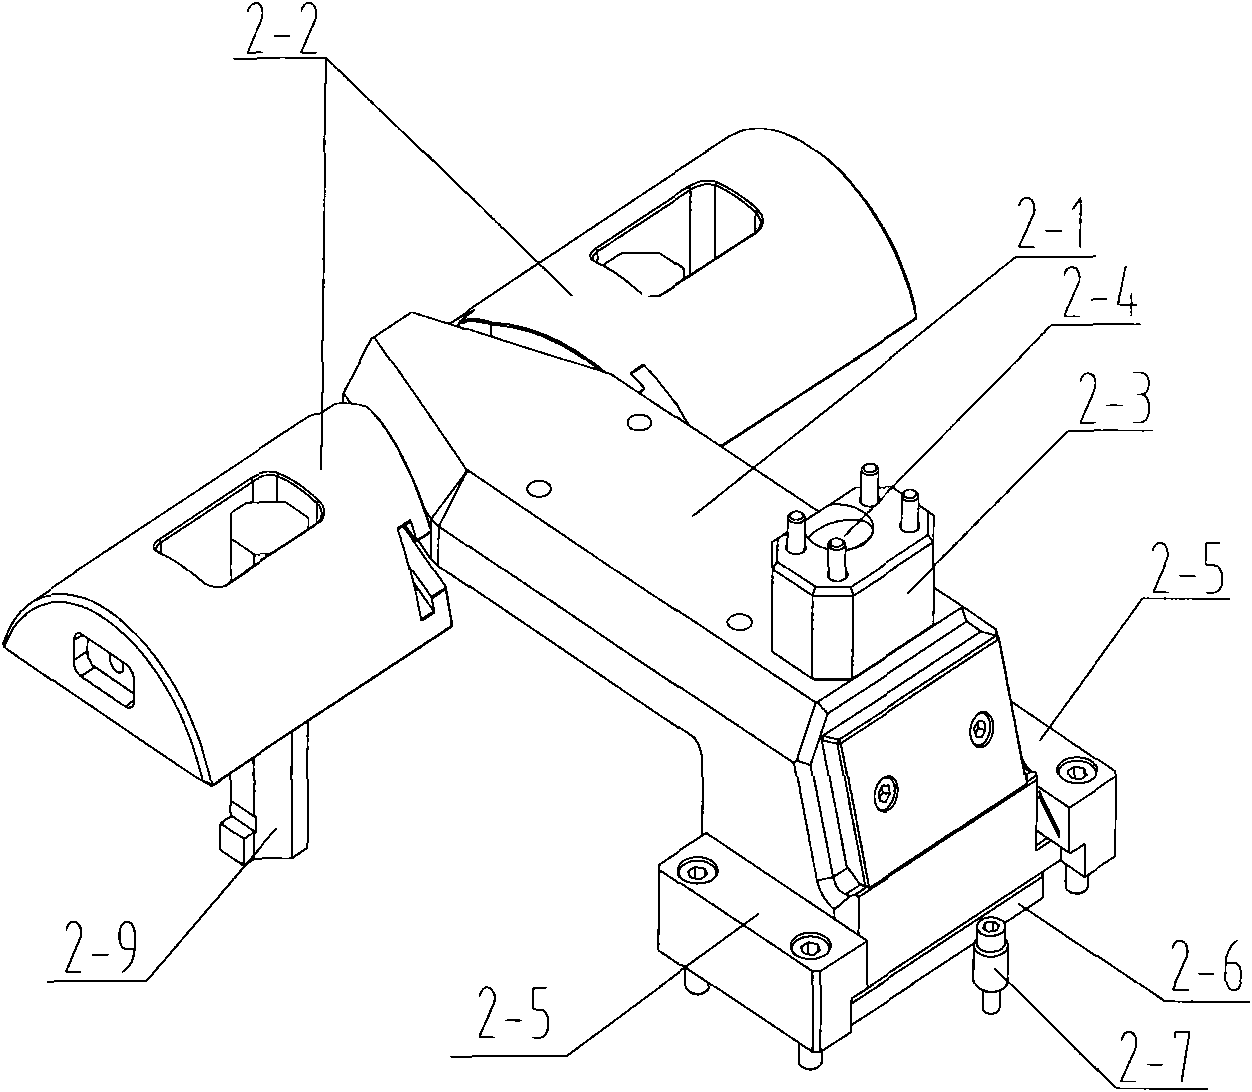 Injection mould provided wtih core-pulling mechanism driven by mould opening and closing actions